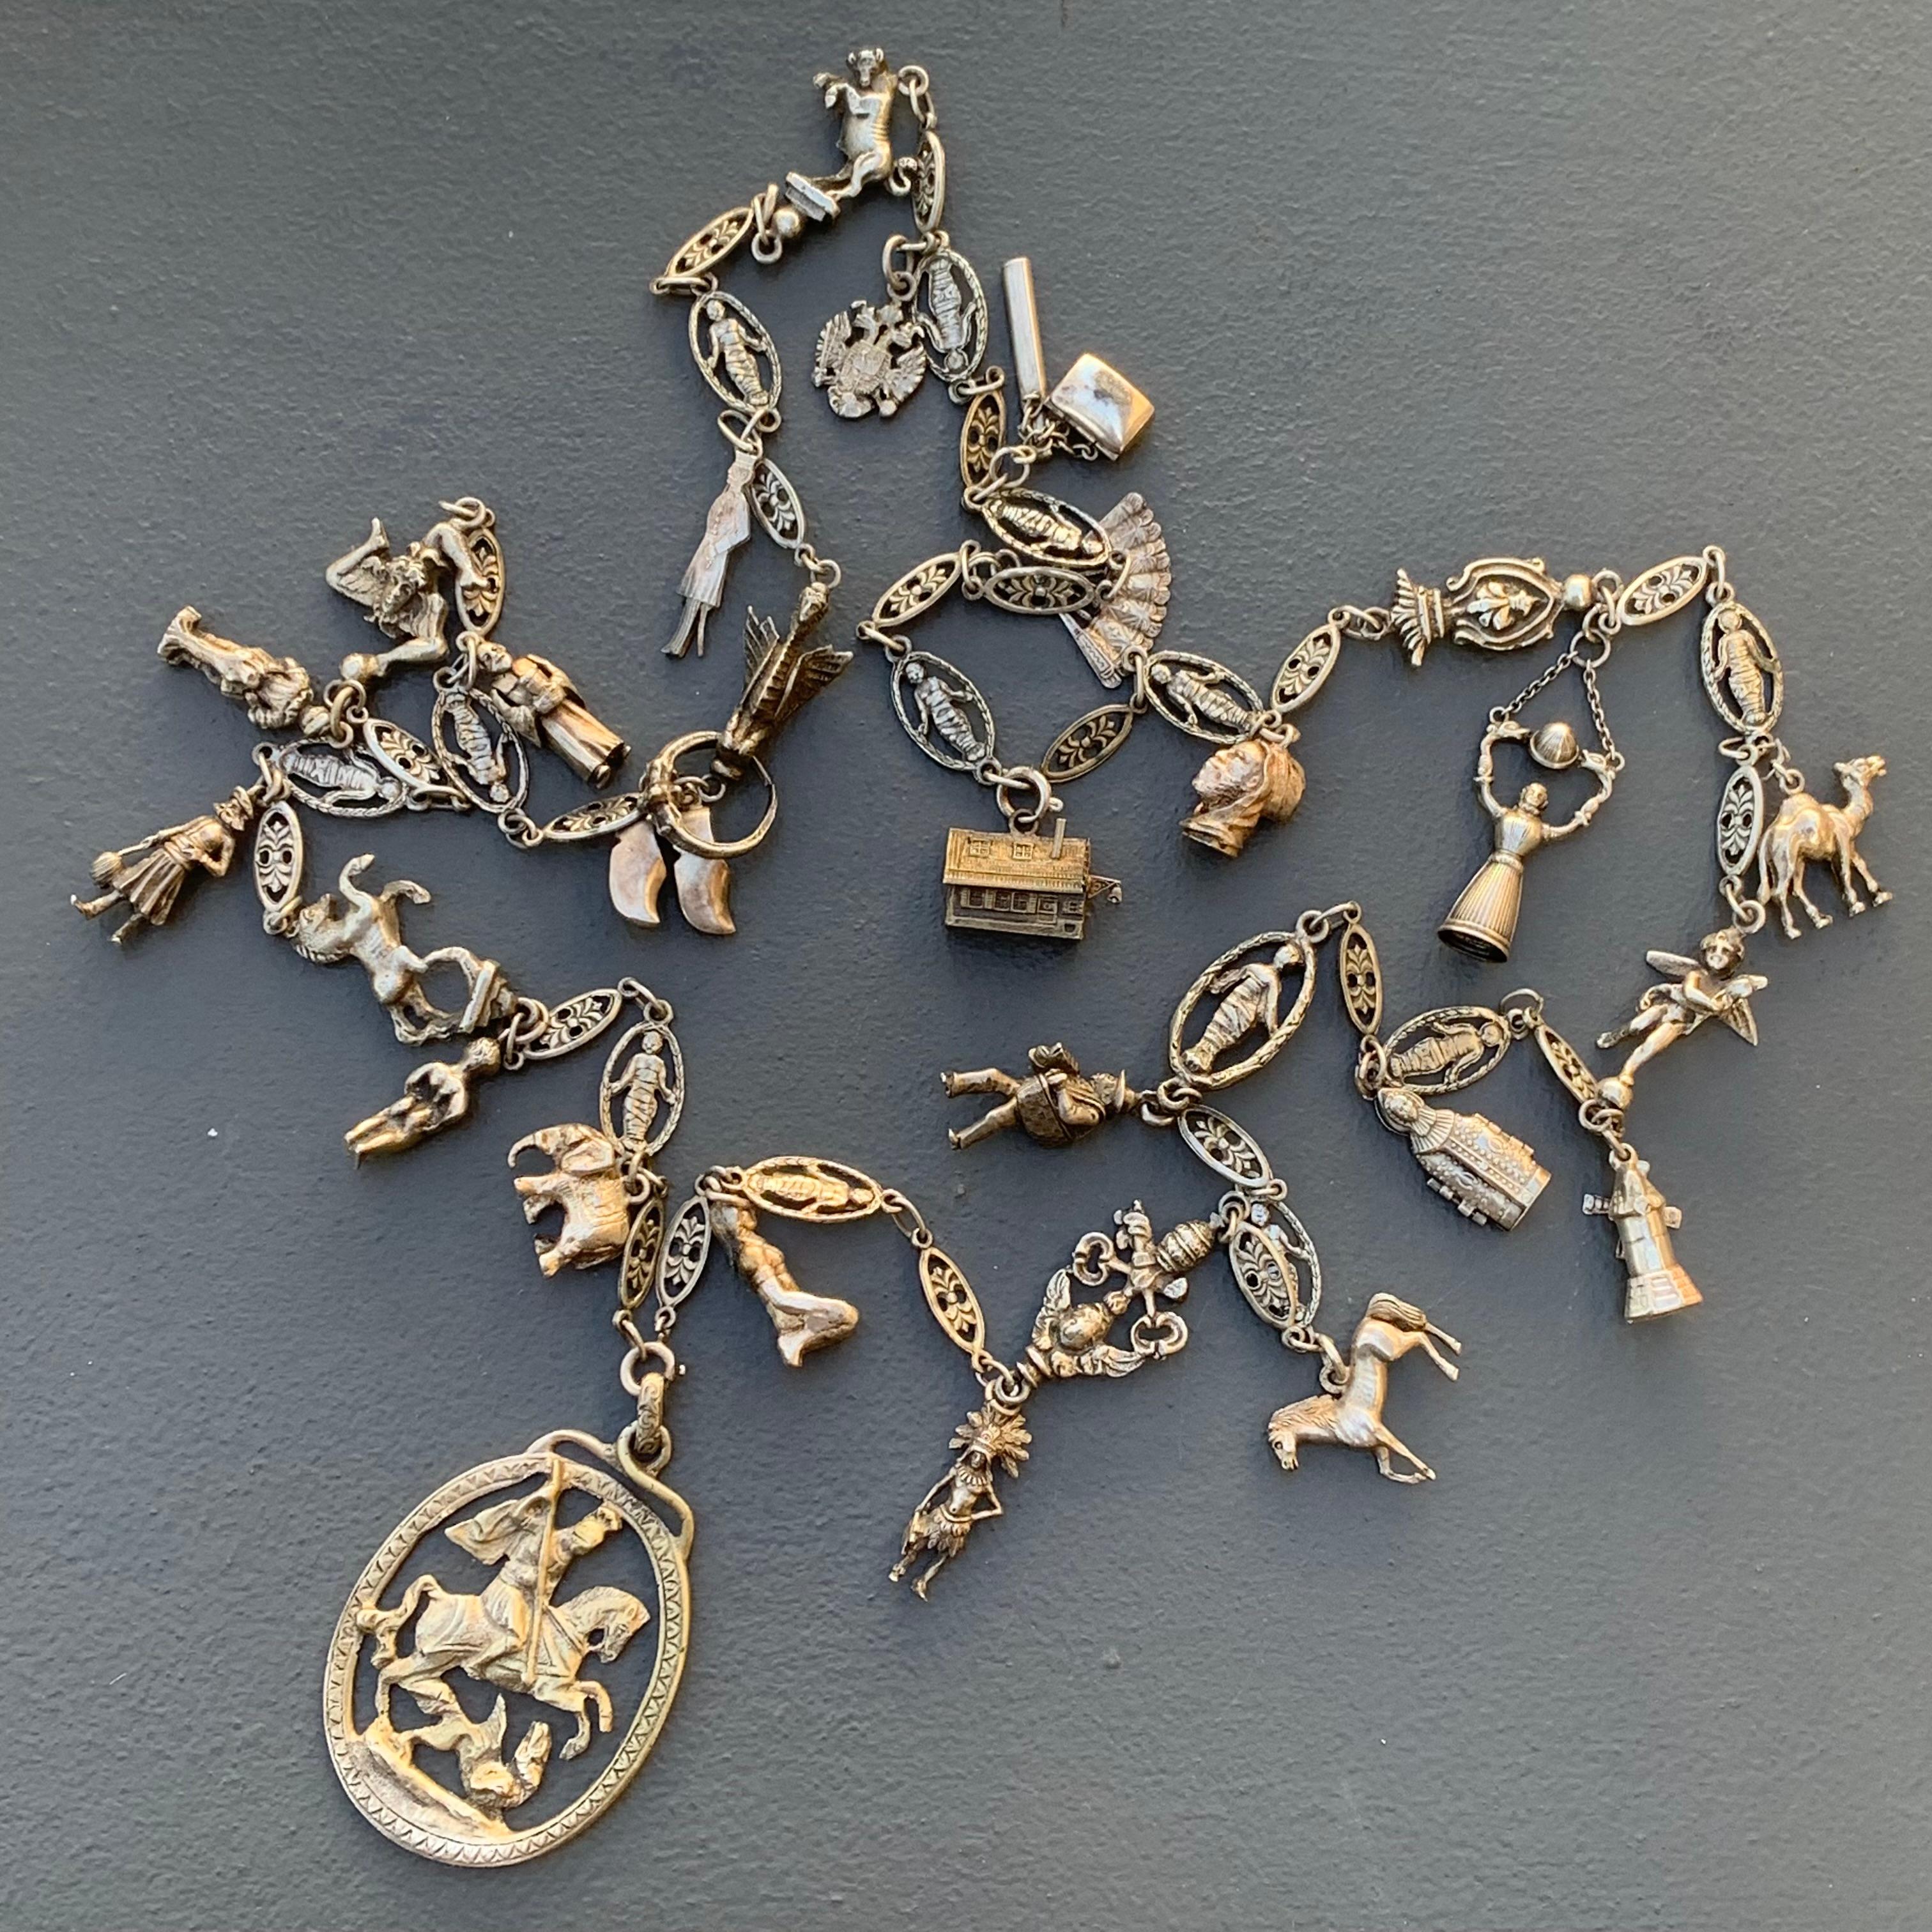 Absolutely stunning RARE Peruzzi 800 Silver St George Pendant charm Necklace .Necklace is extremely well made with very fine details . Chain is very long with different links ( mummies , 3d horse ,3d swan , cherub to name a few ) with 3D